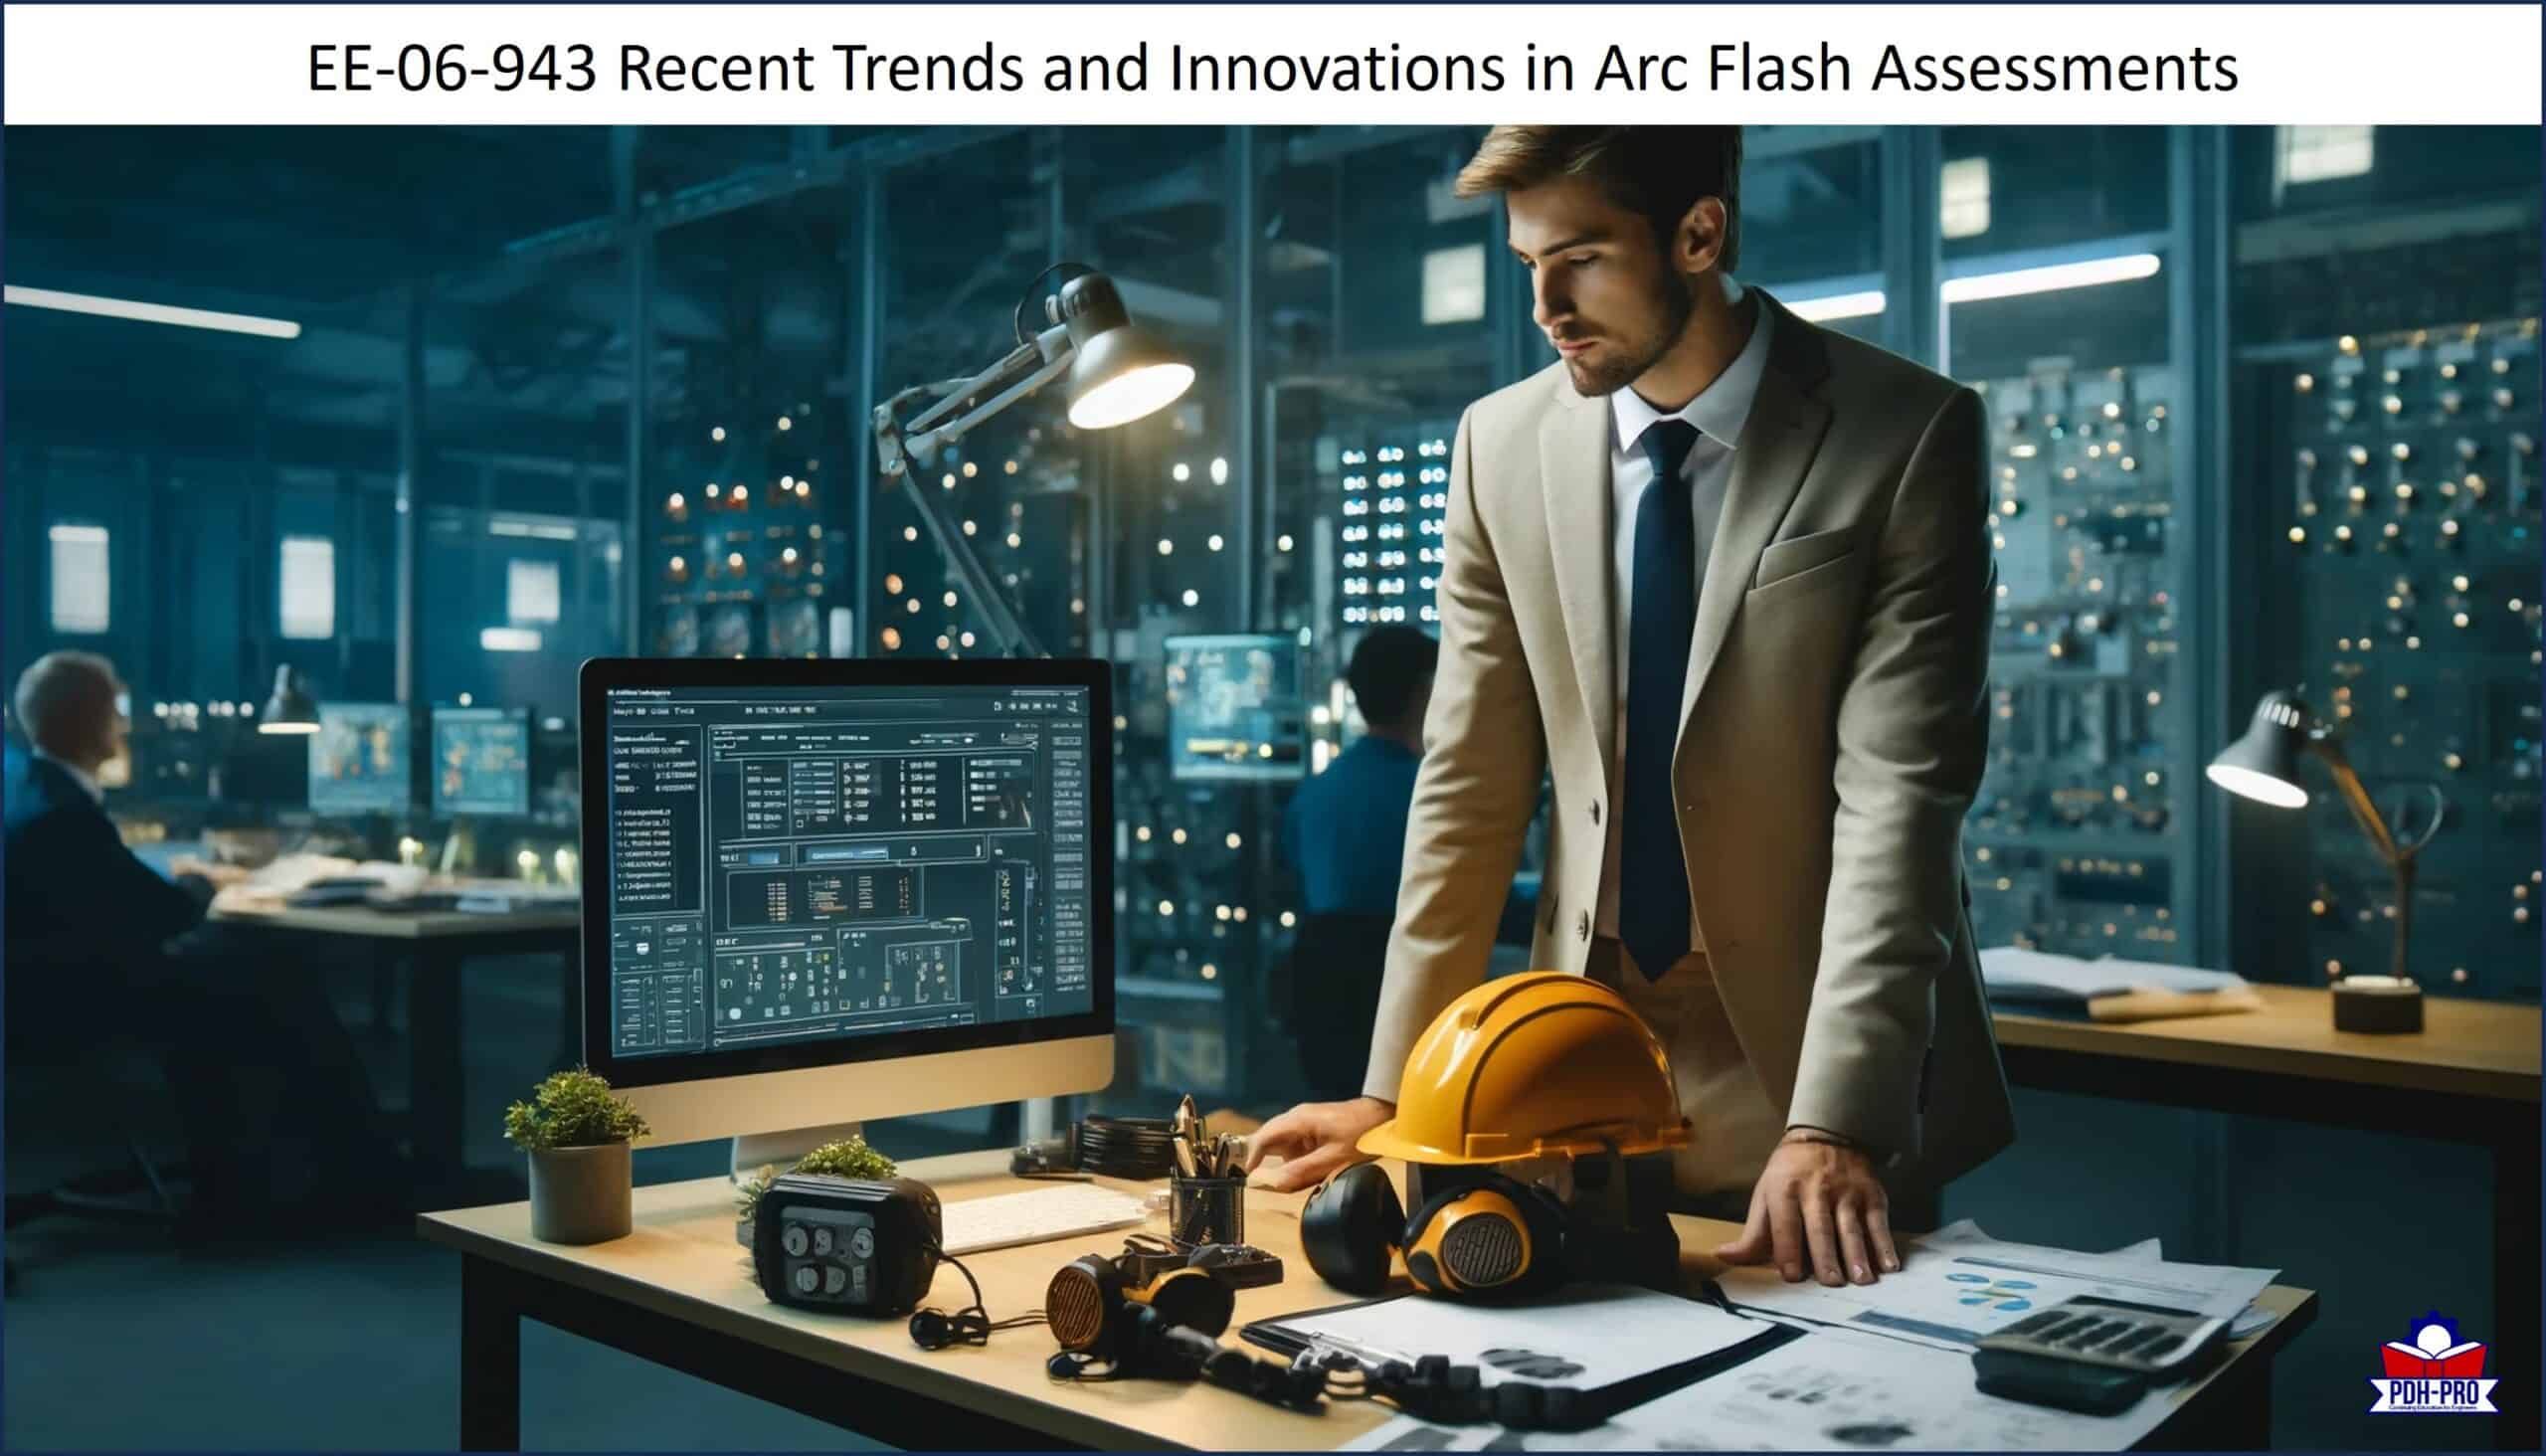 Recent Trends and Innovations in Arc Flash Assessments